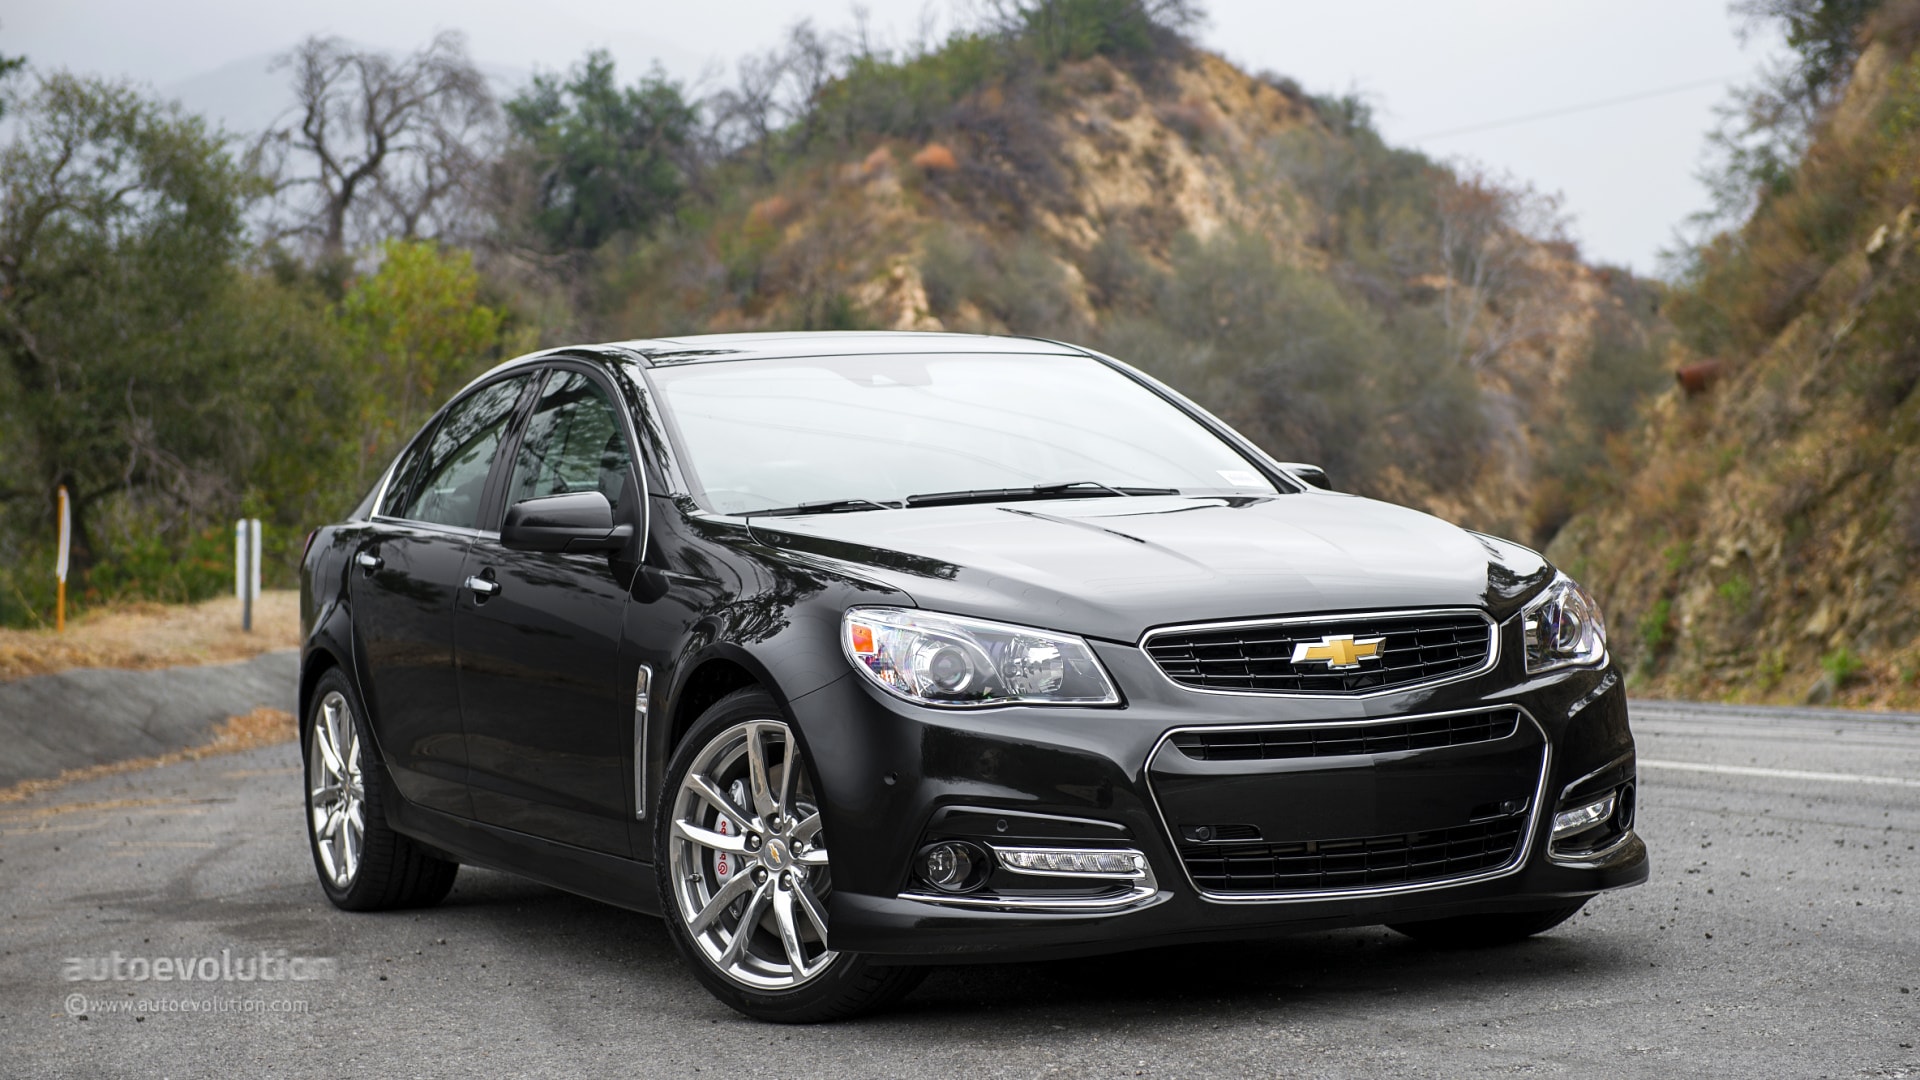 chevrolet-ss-gets-thumbs-up-from-consumer-reports-video-83273_1.jpg